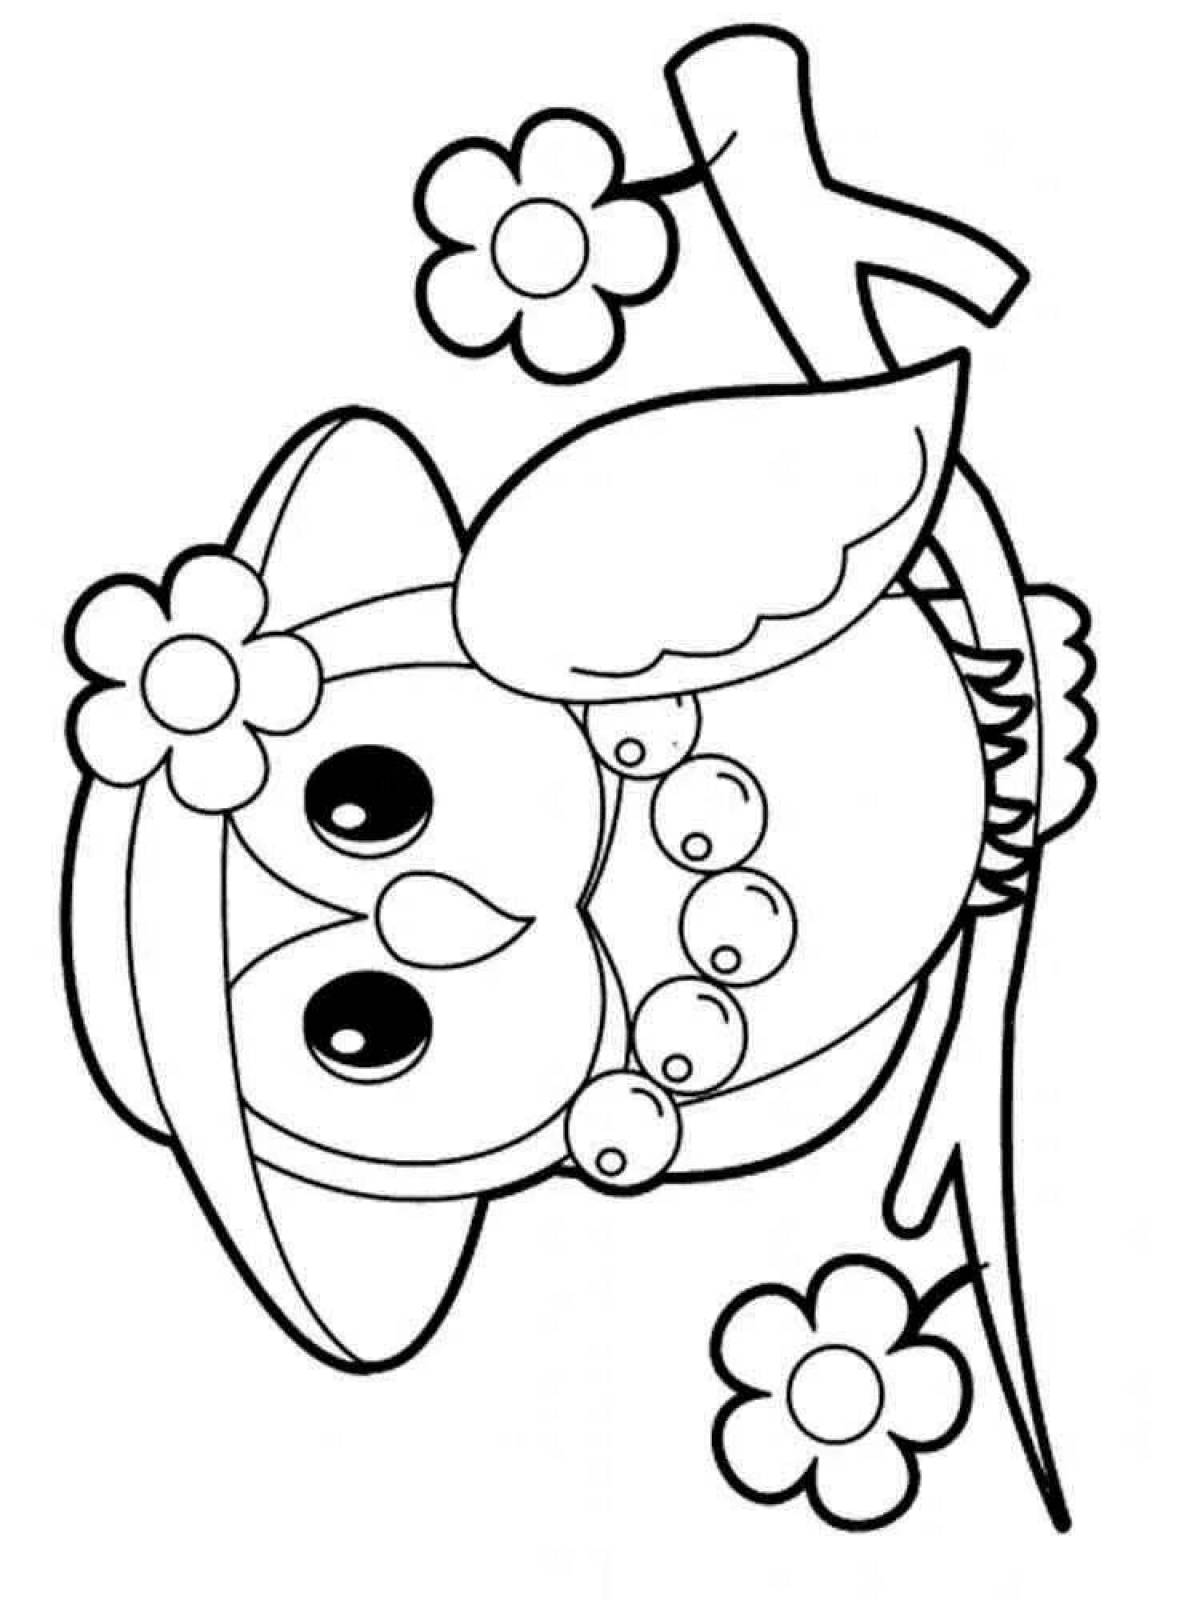 Colorful-frenzy paints 6-7 years coloring page